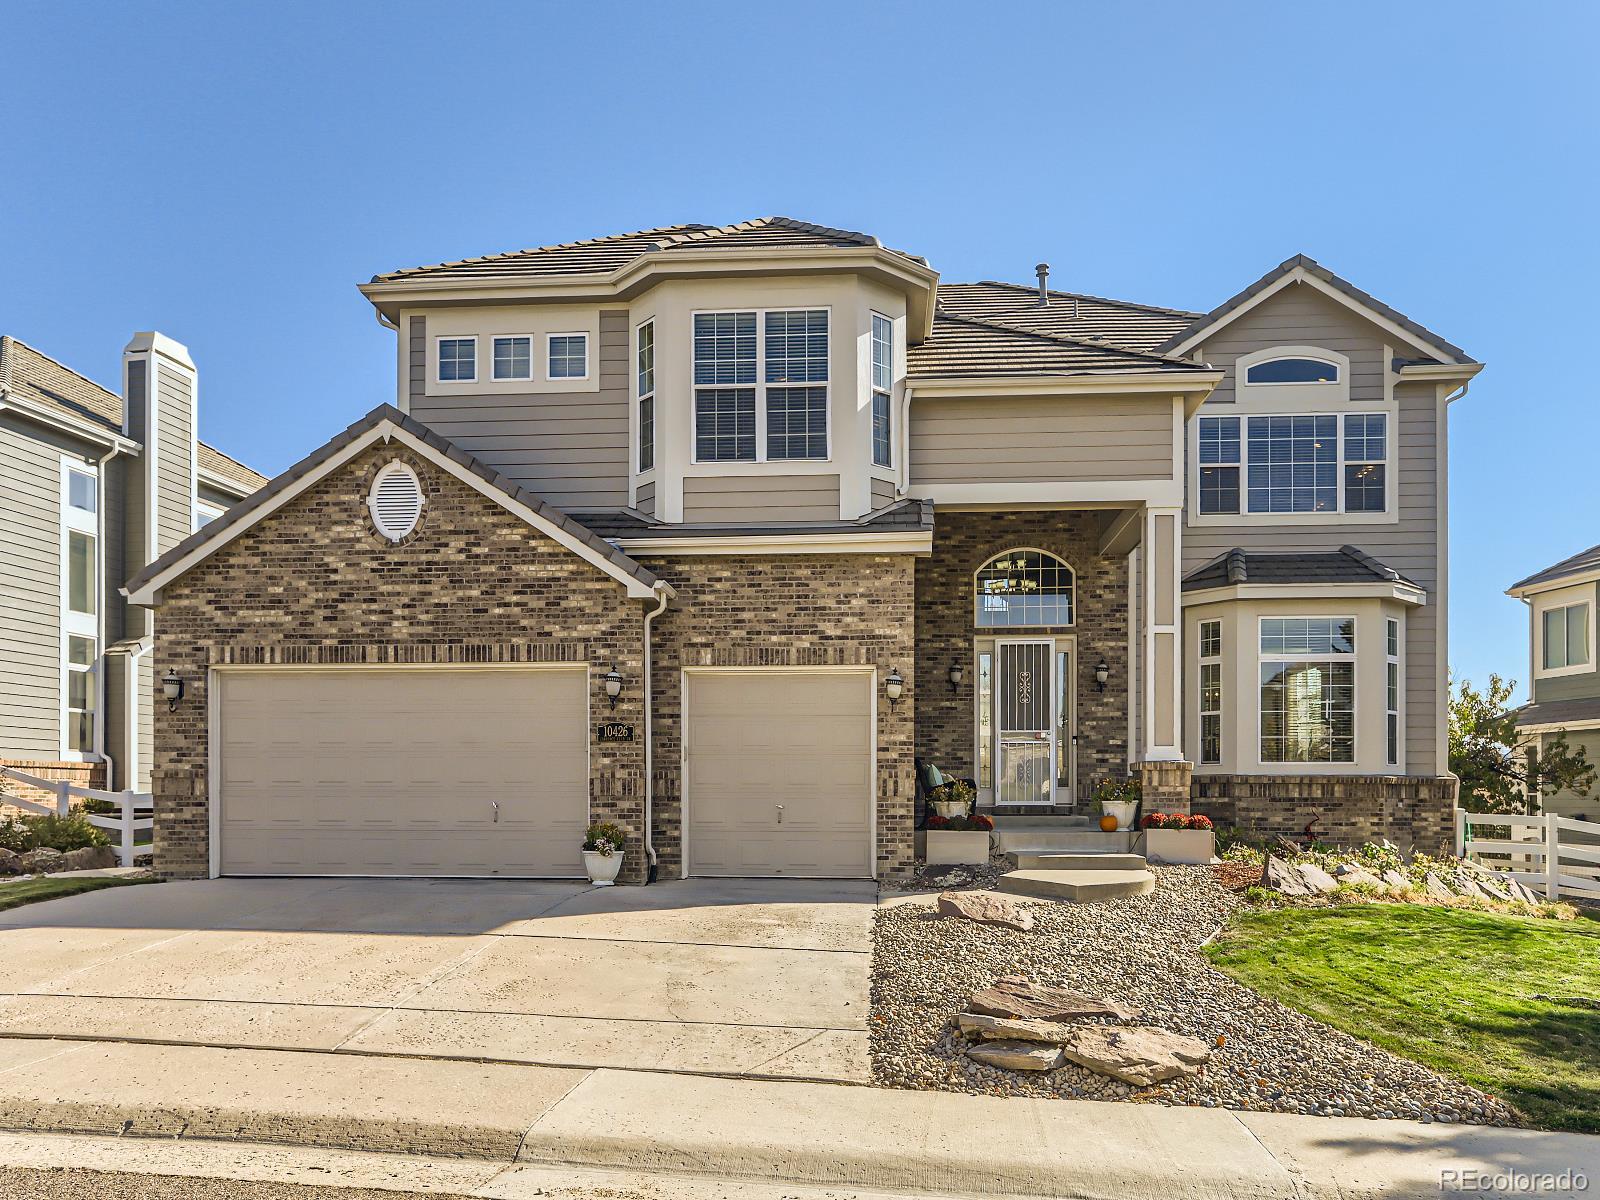 Report Image for 10426  Carriage Club Drive,Lone Tree, Colorado